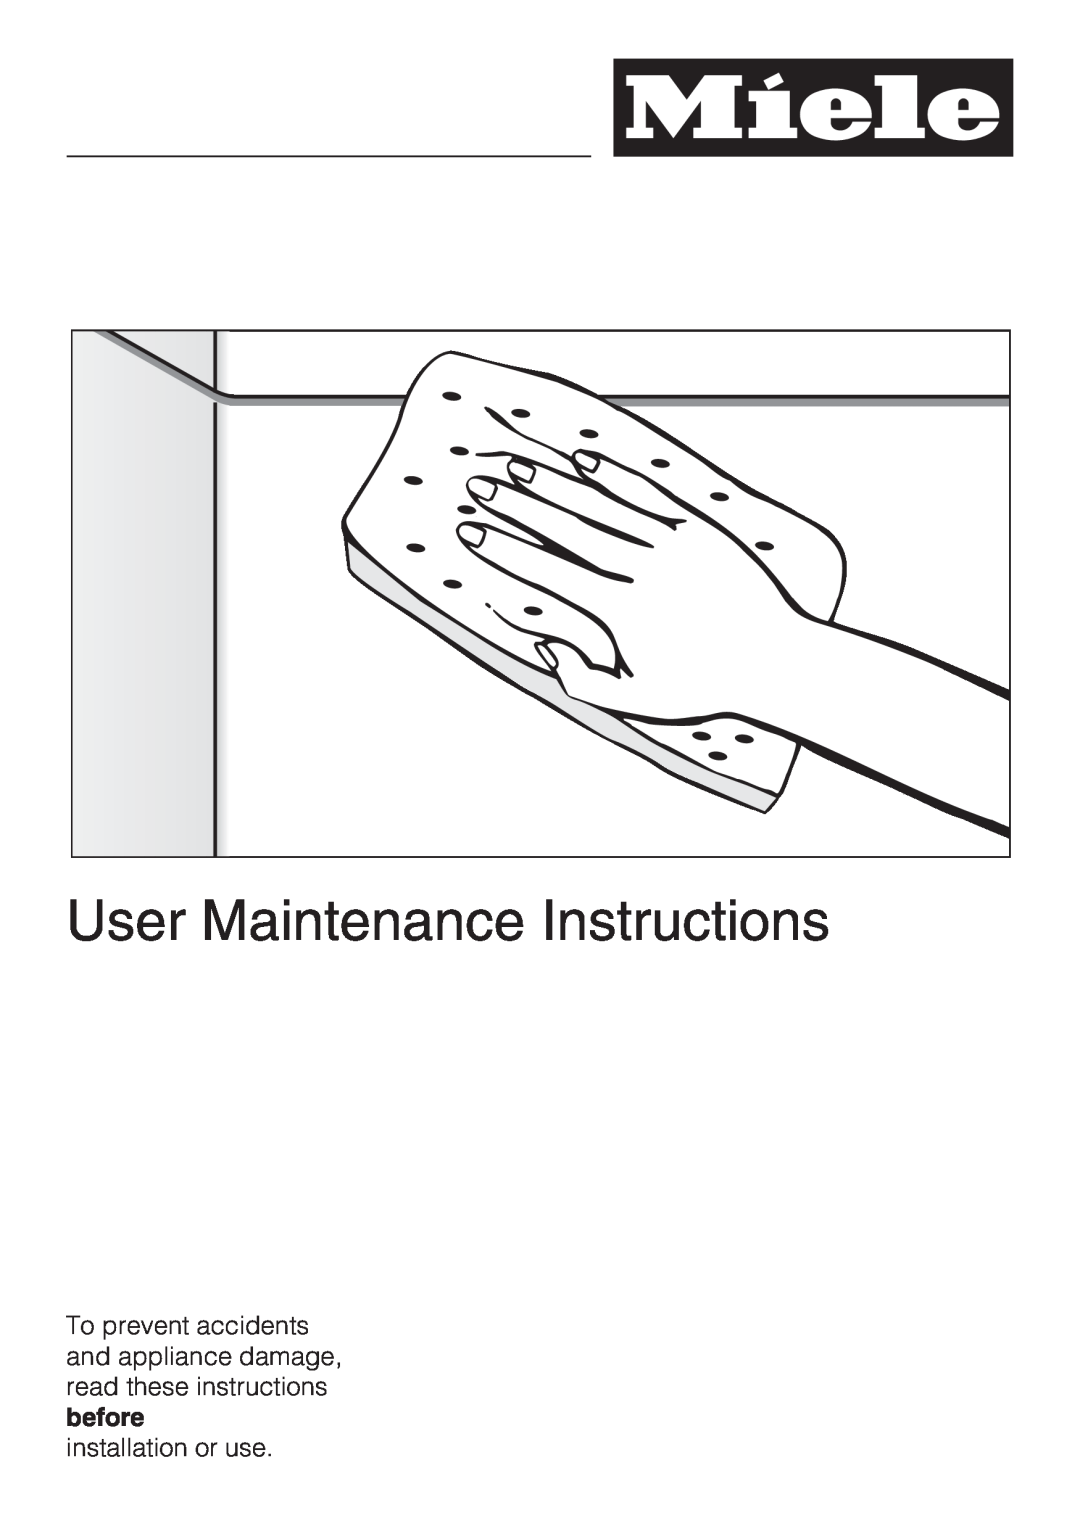 Miele G 1262 manual User Maintenance Instructions, installation or use 